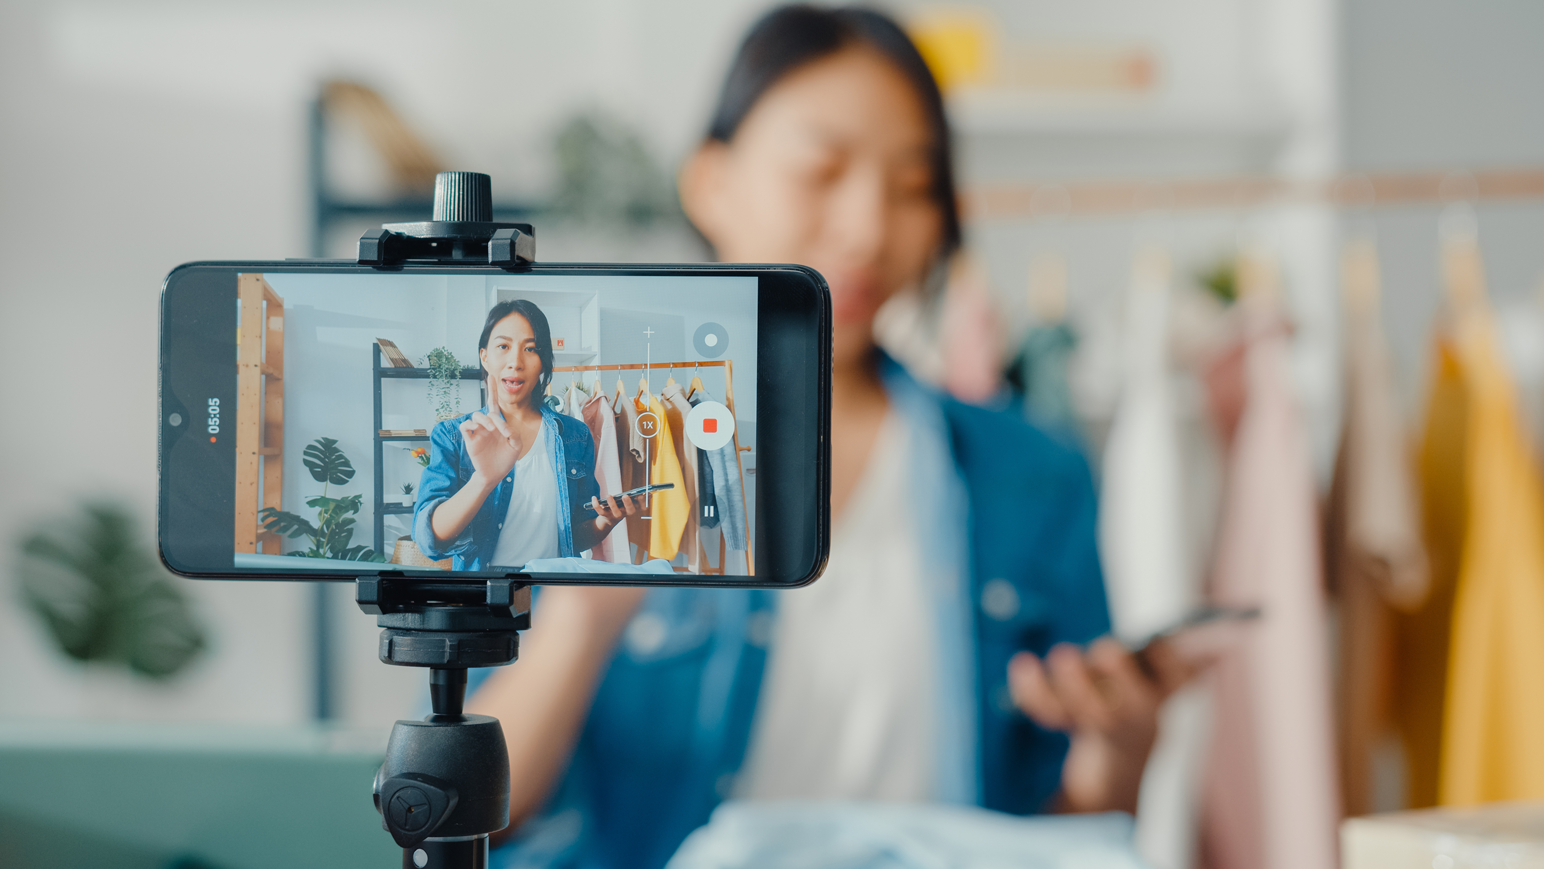 The Digital Marketing Revolution: Gen Z’s Video-First Approach and SimuStream’s Role